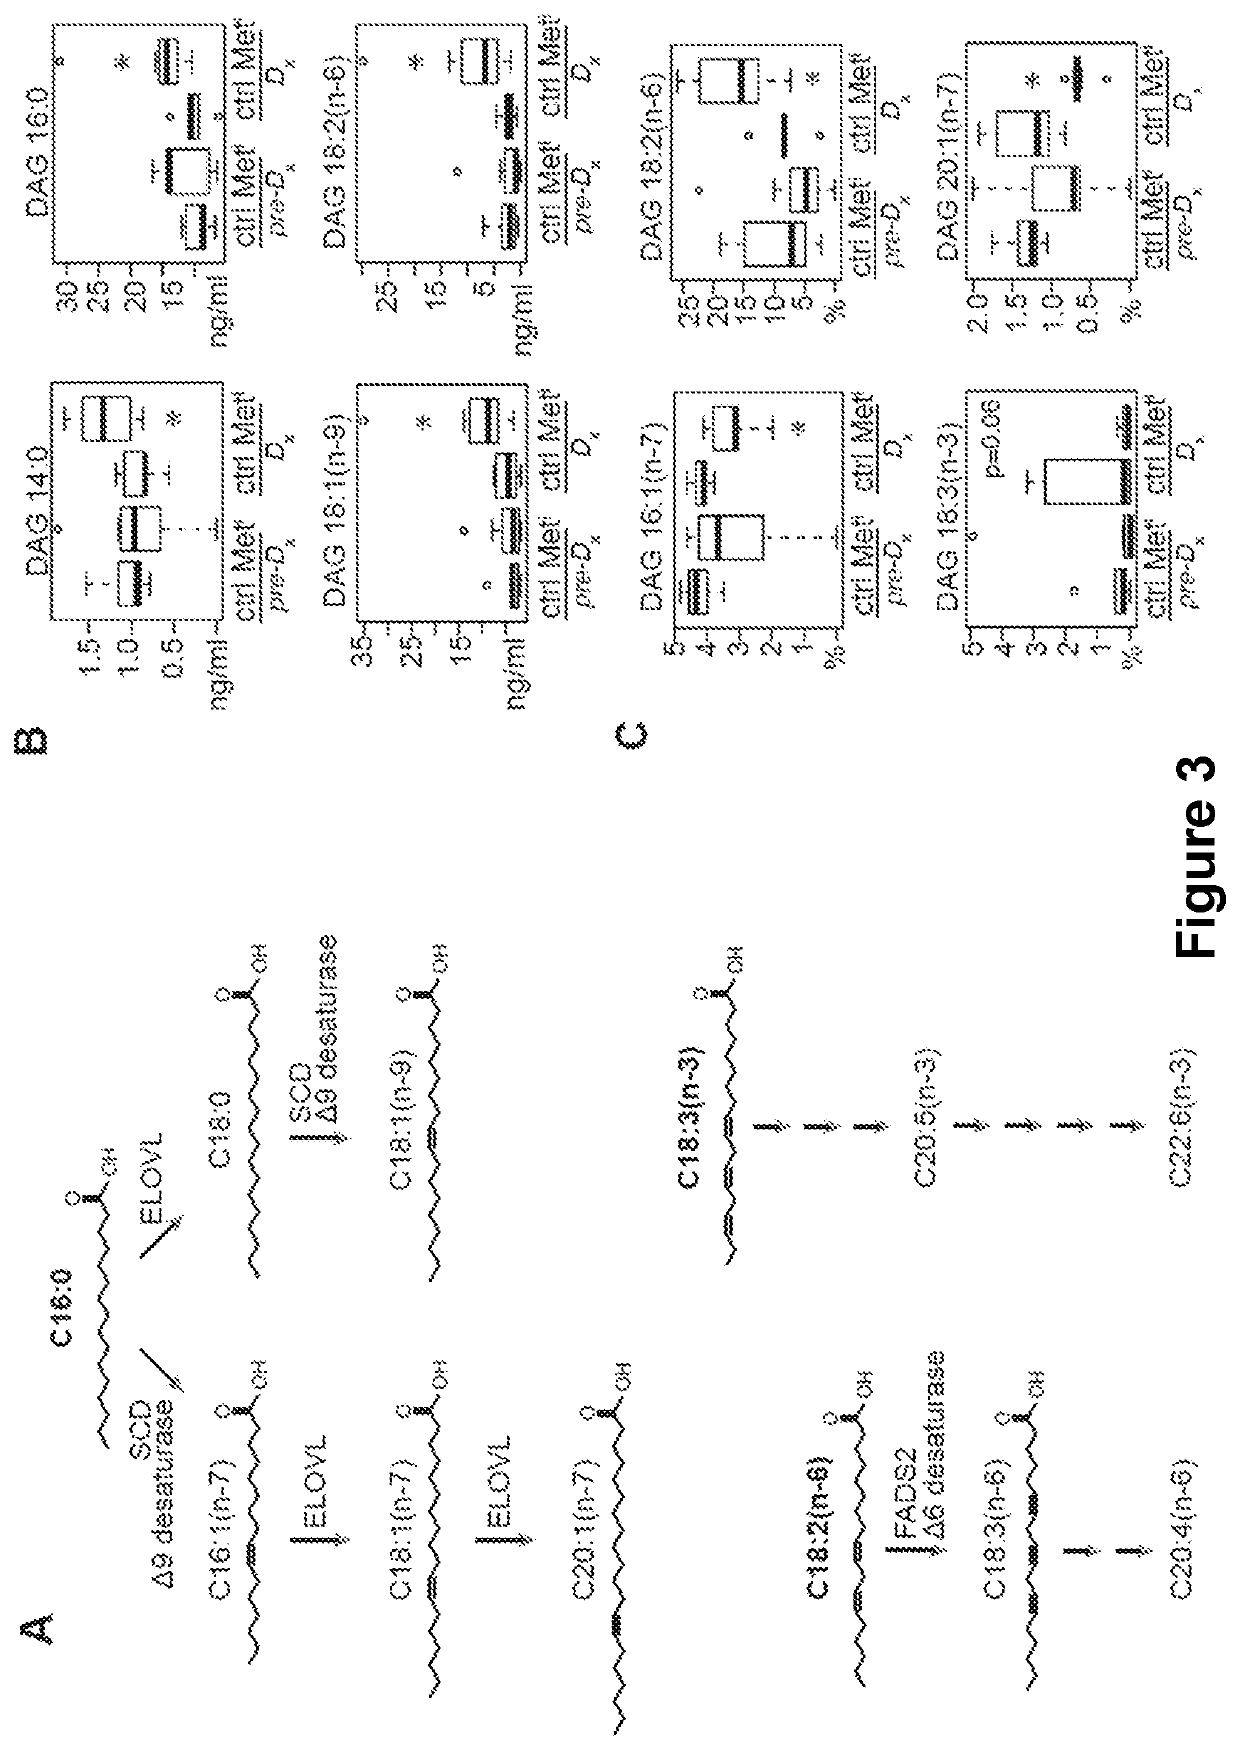 Methods for predicting glucoregulatory dysfunction via diacylglycerol fatty acid species concentrations